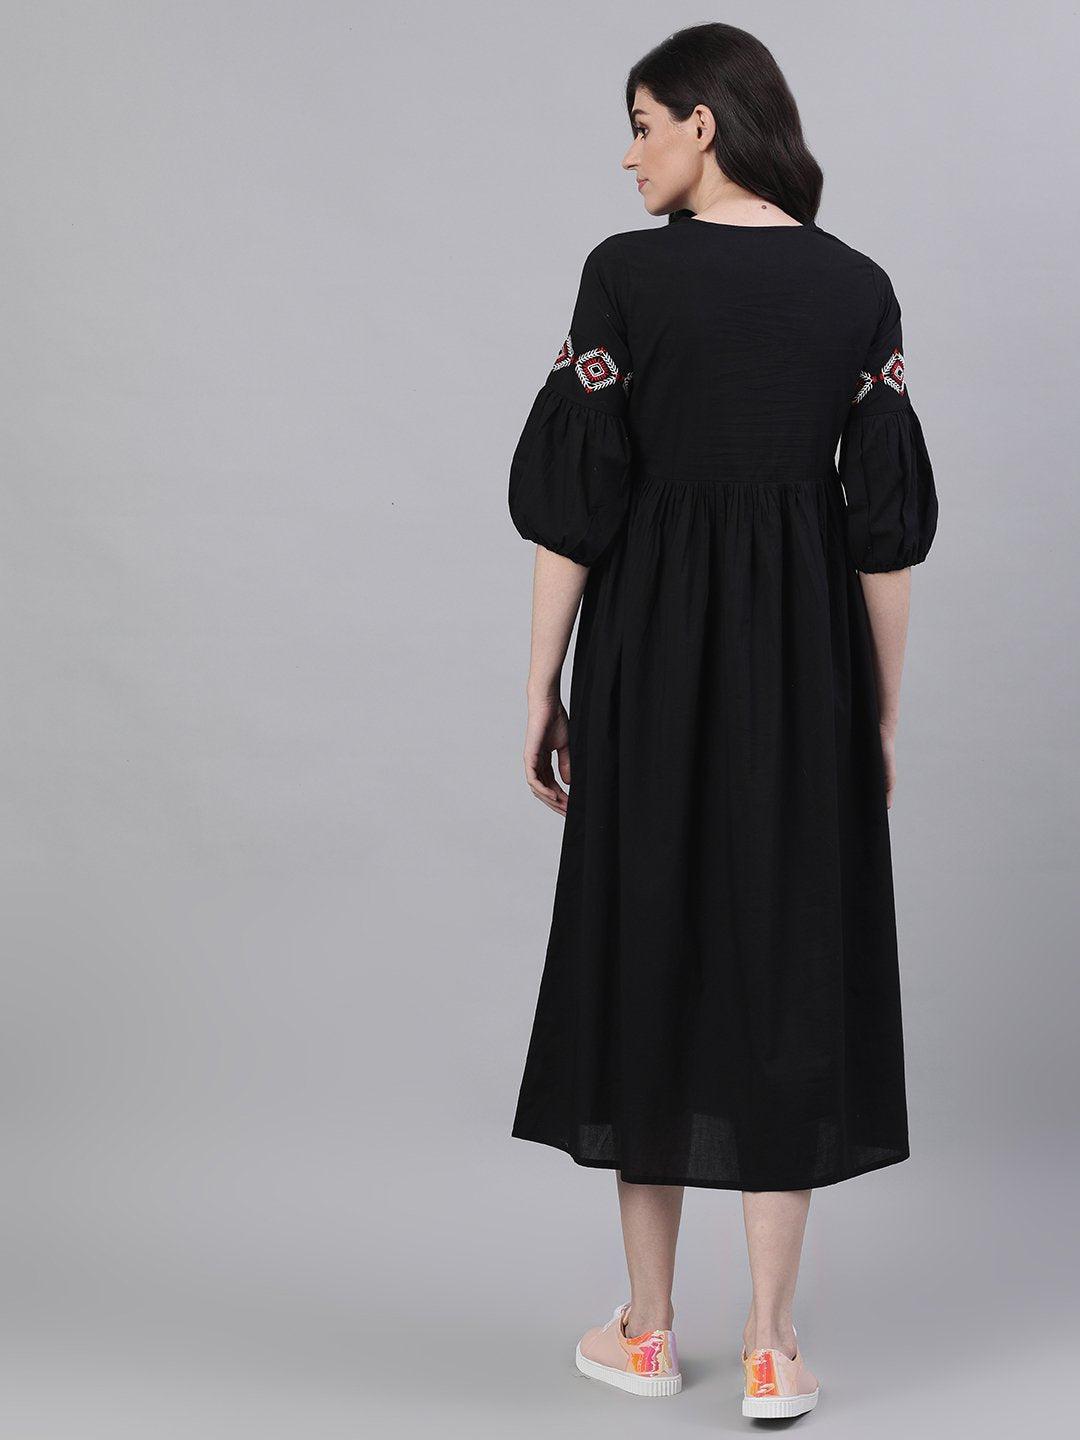 black-solid-tie-up-neck-fit-and-flare-dress-10804008BK, Women Clothing, Cotton Dress